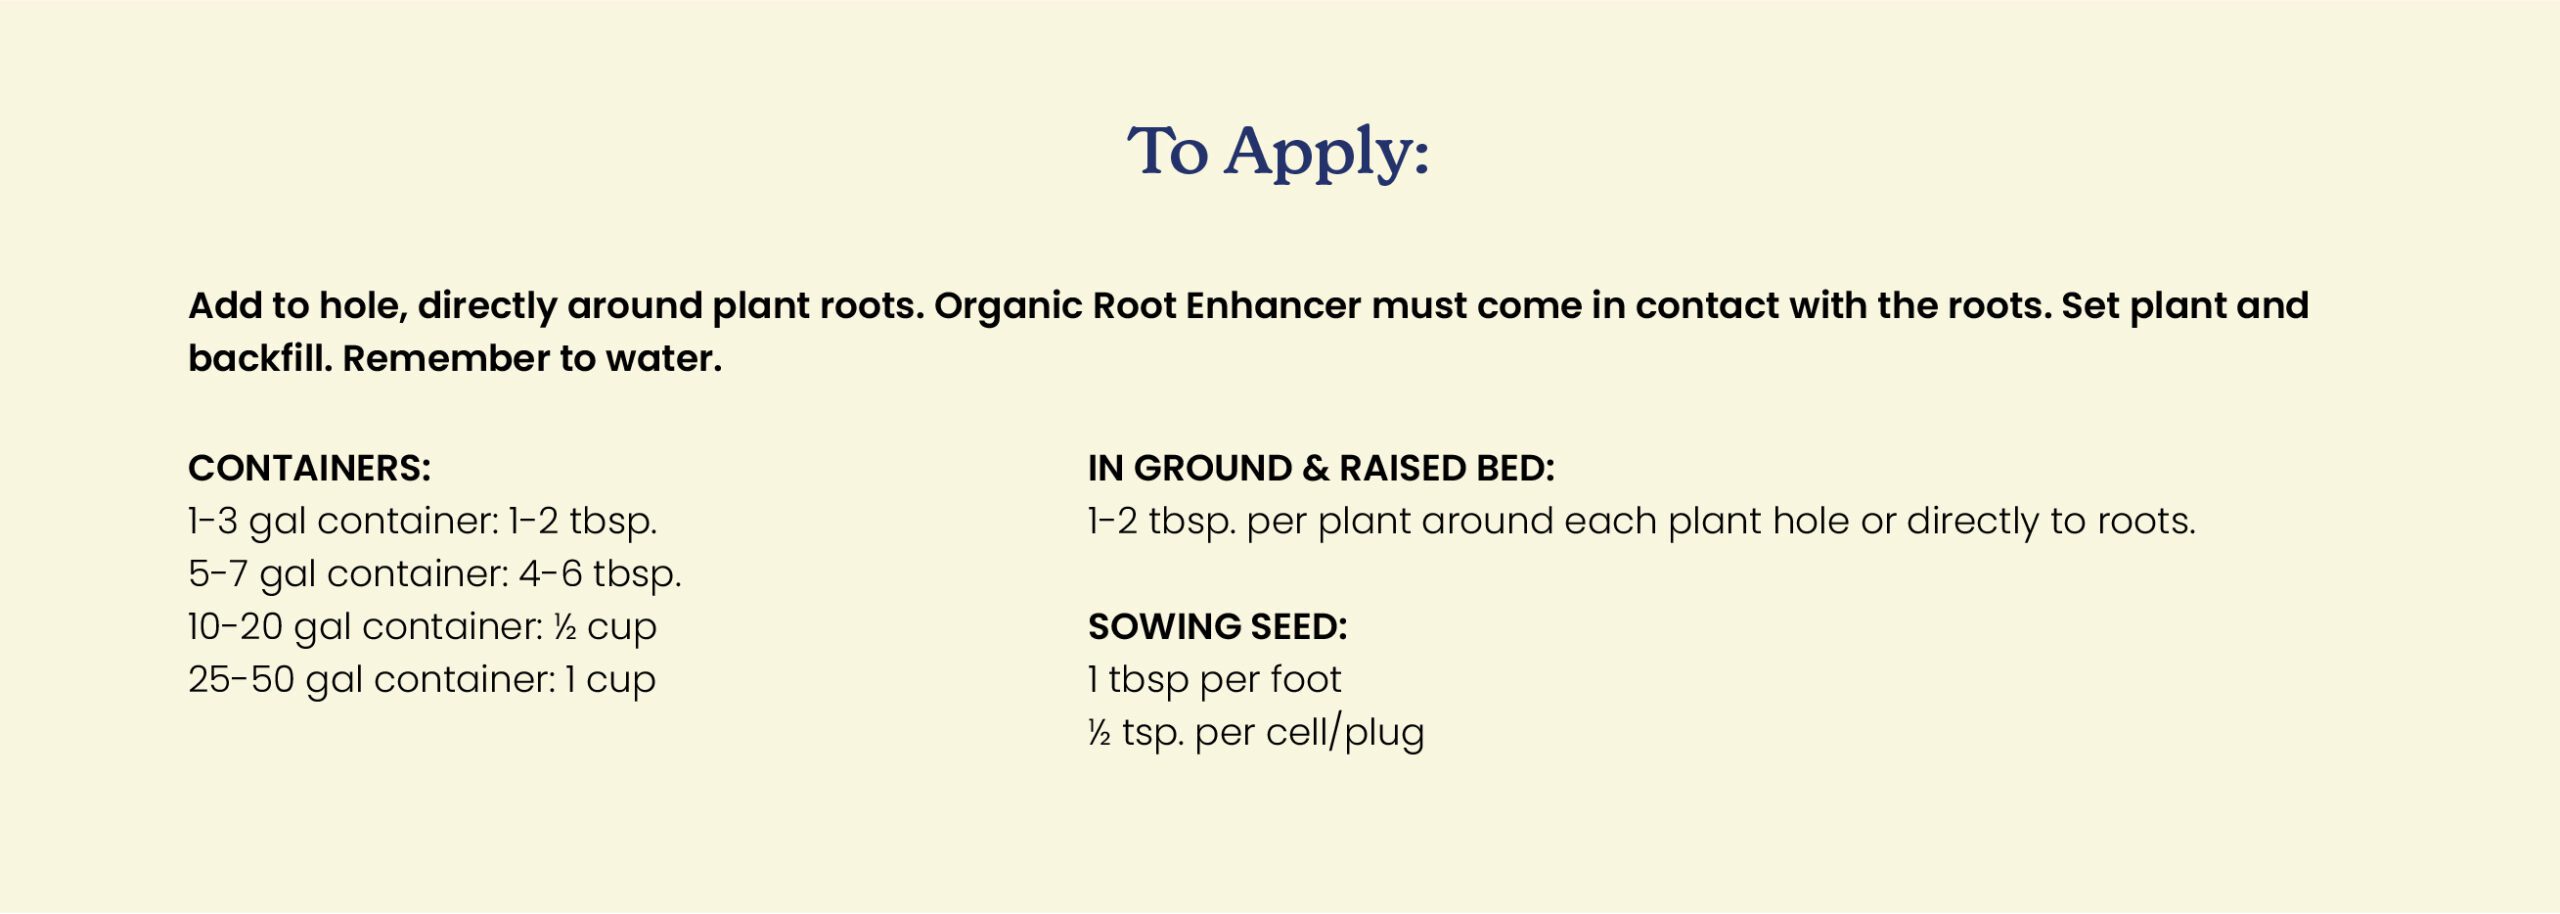 organic root enhancer how to apply